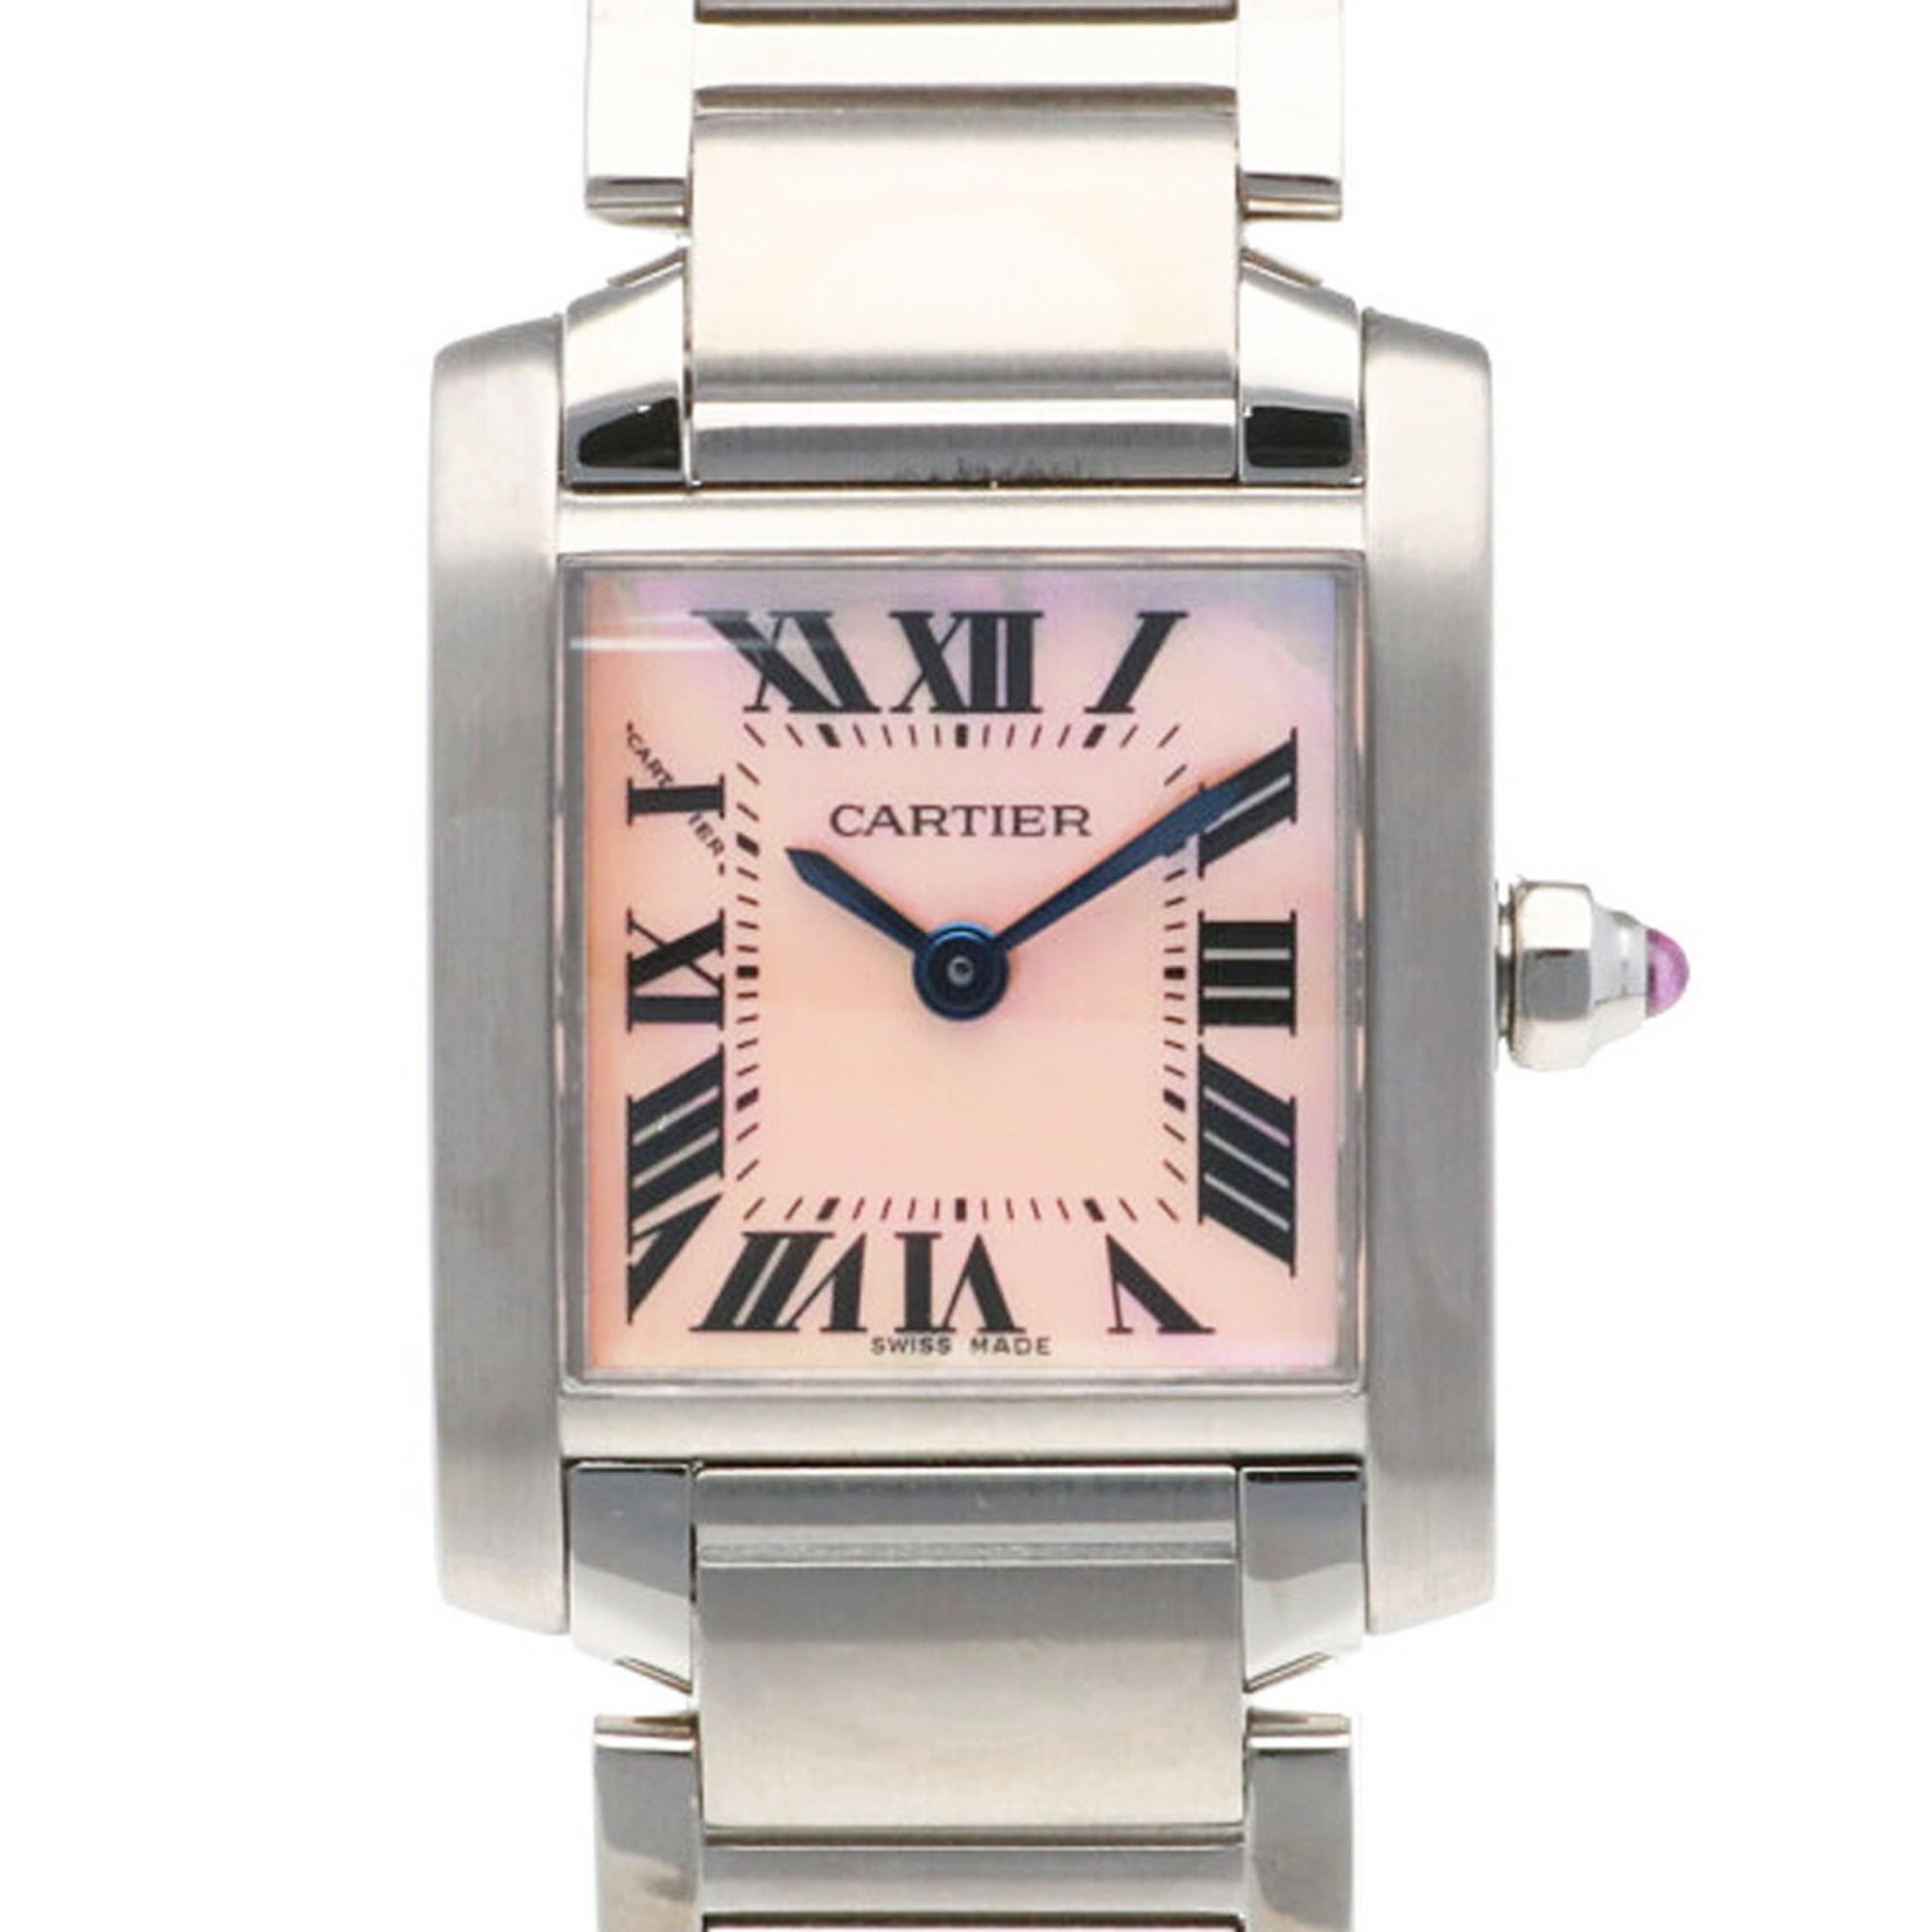 Cartier Tank Francaise for $2,742 for sale from a Seller on Chrono24